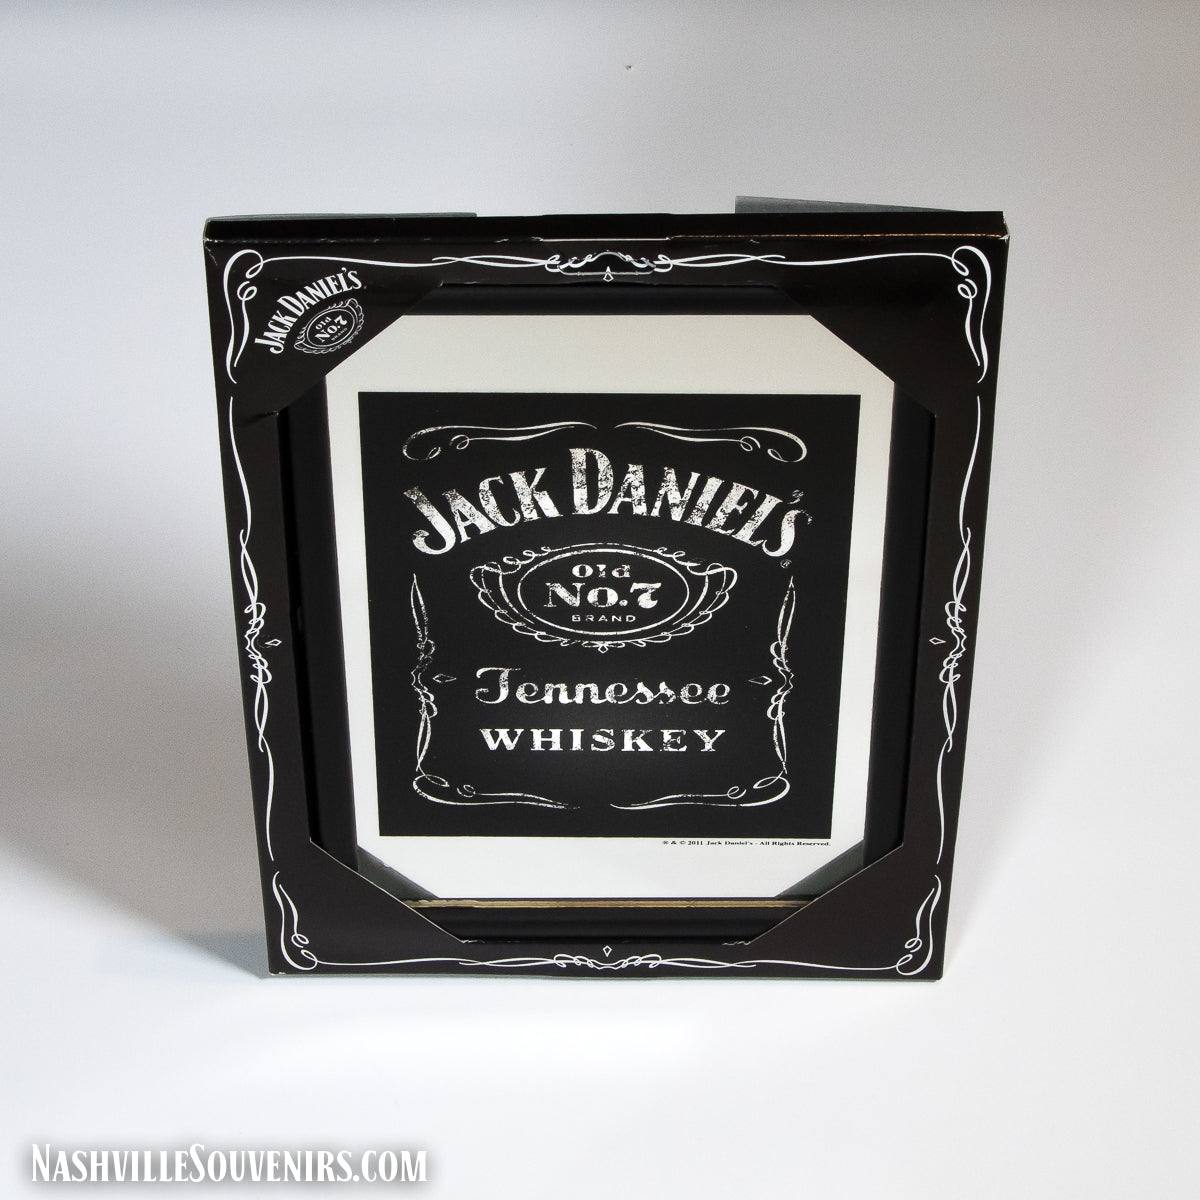 Officially licensed Jack Daniels Weathered Label Mirror. FREE SHIPPING on all US orders over $75!